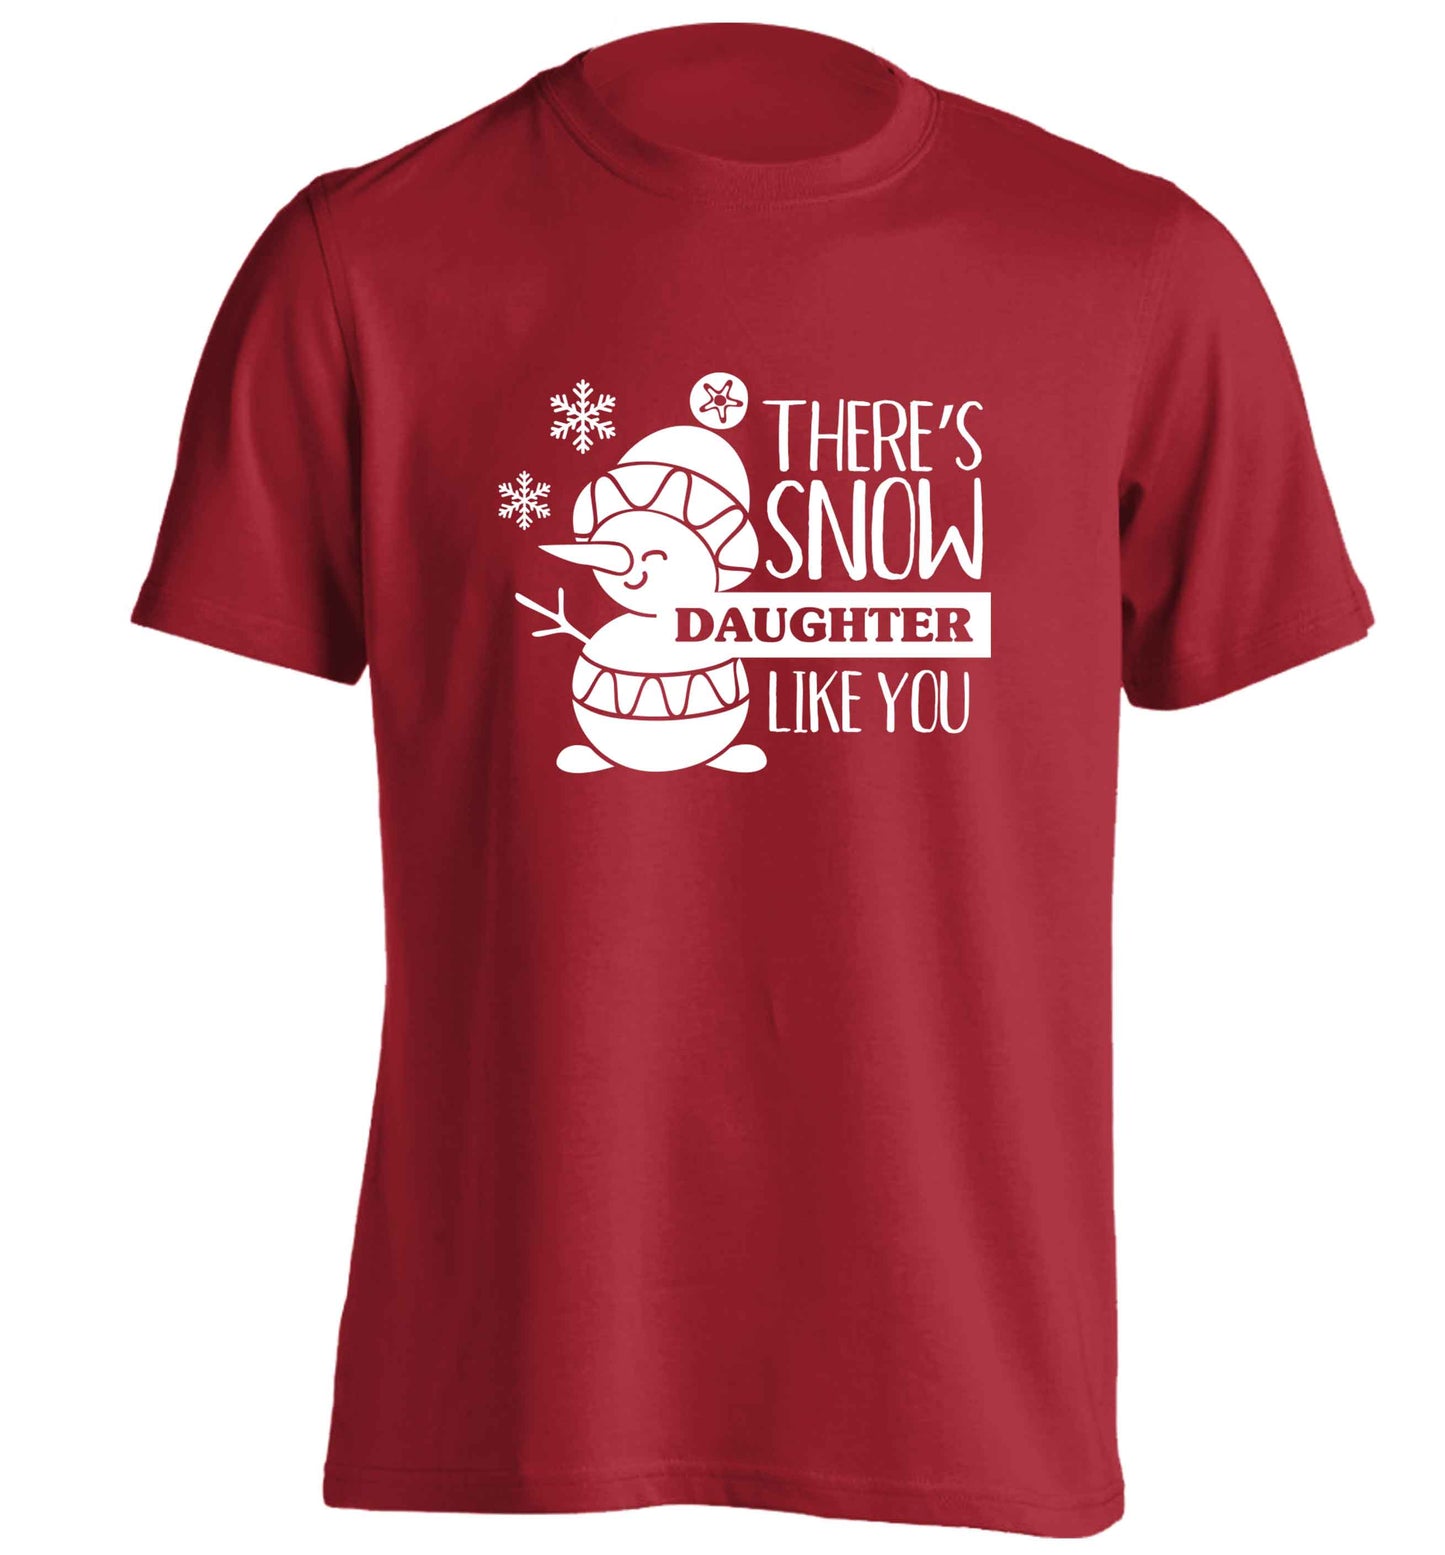 There's snow daughter like you adults unisex red Tshirt 2XL